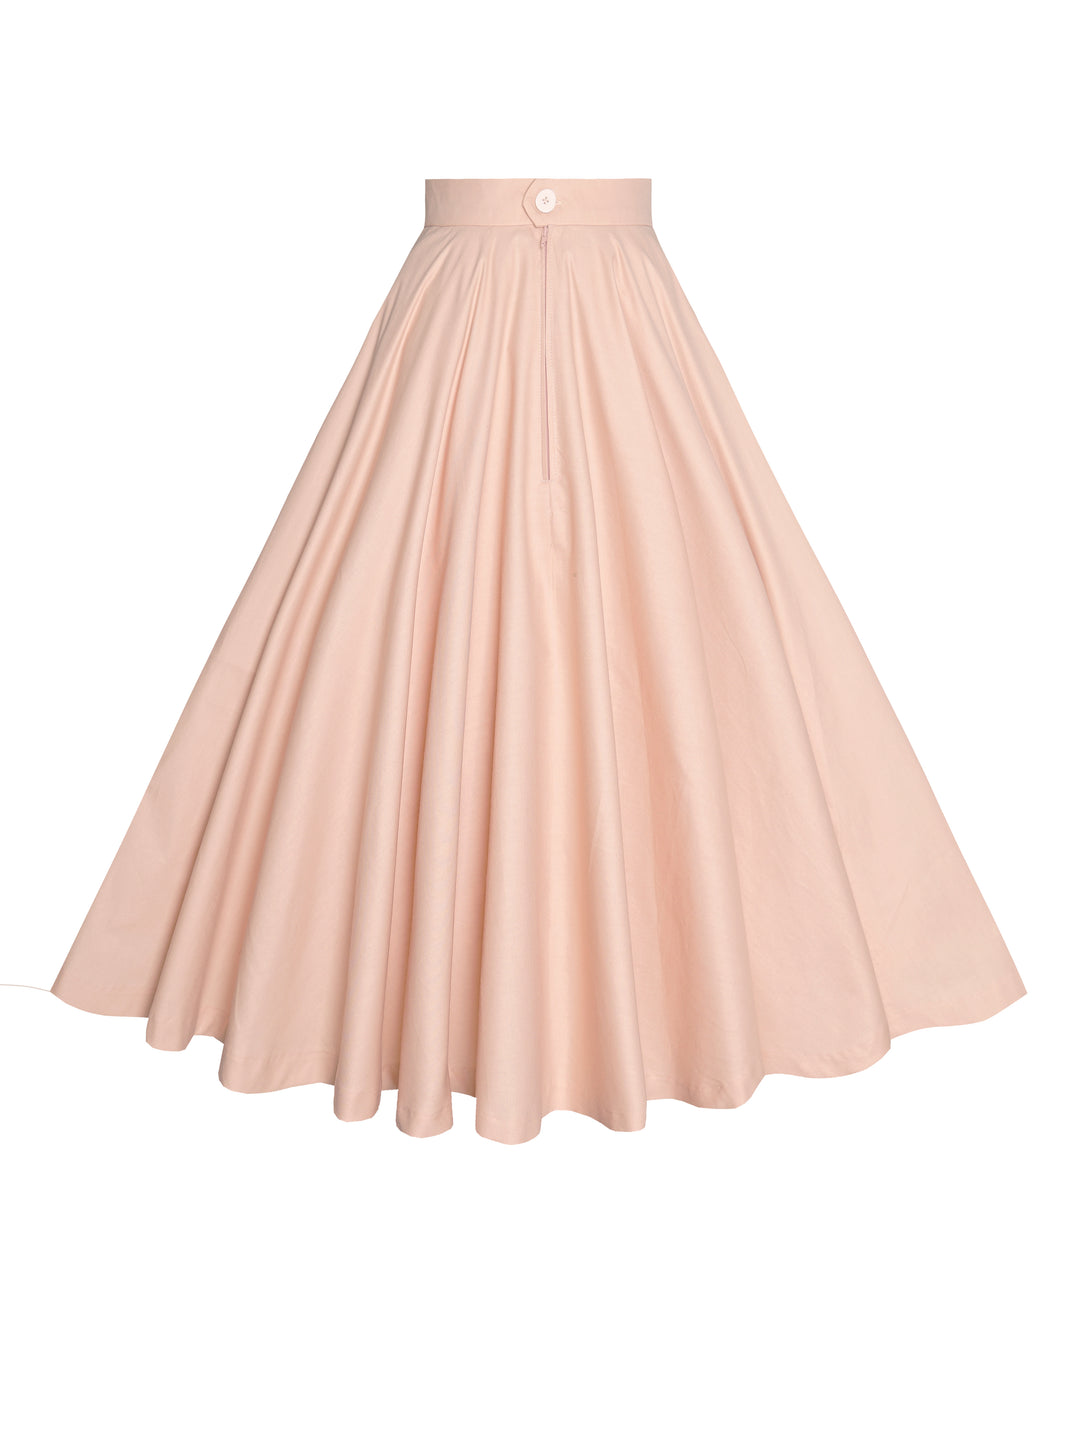 MTO - Lindy Skirt Dusty Pink Cotton